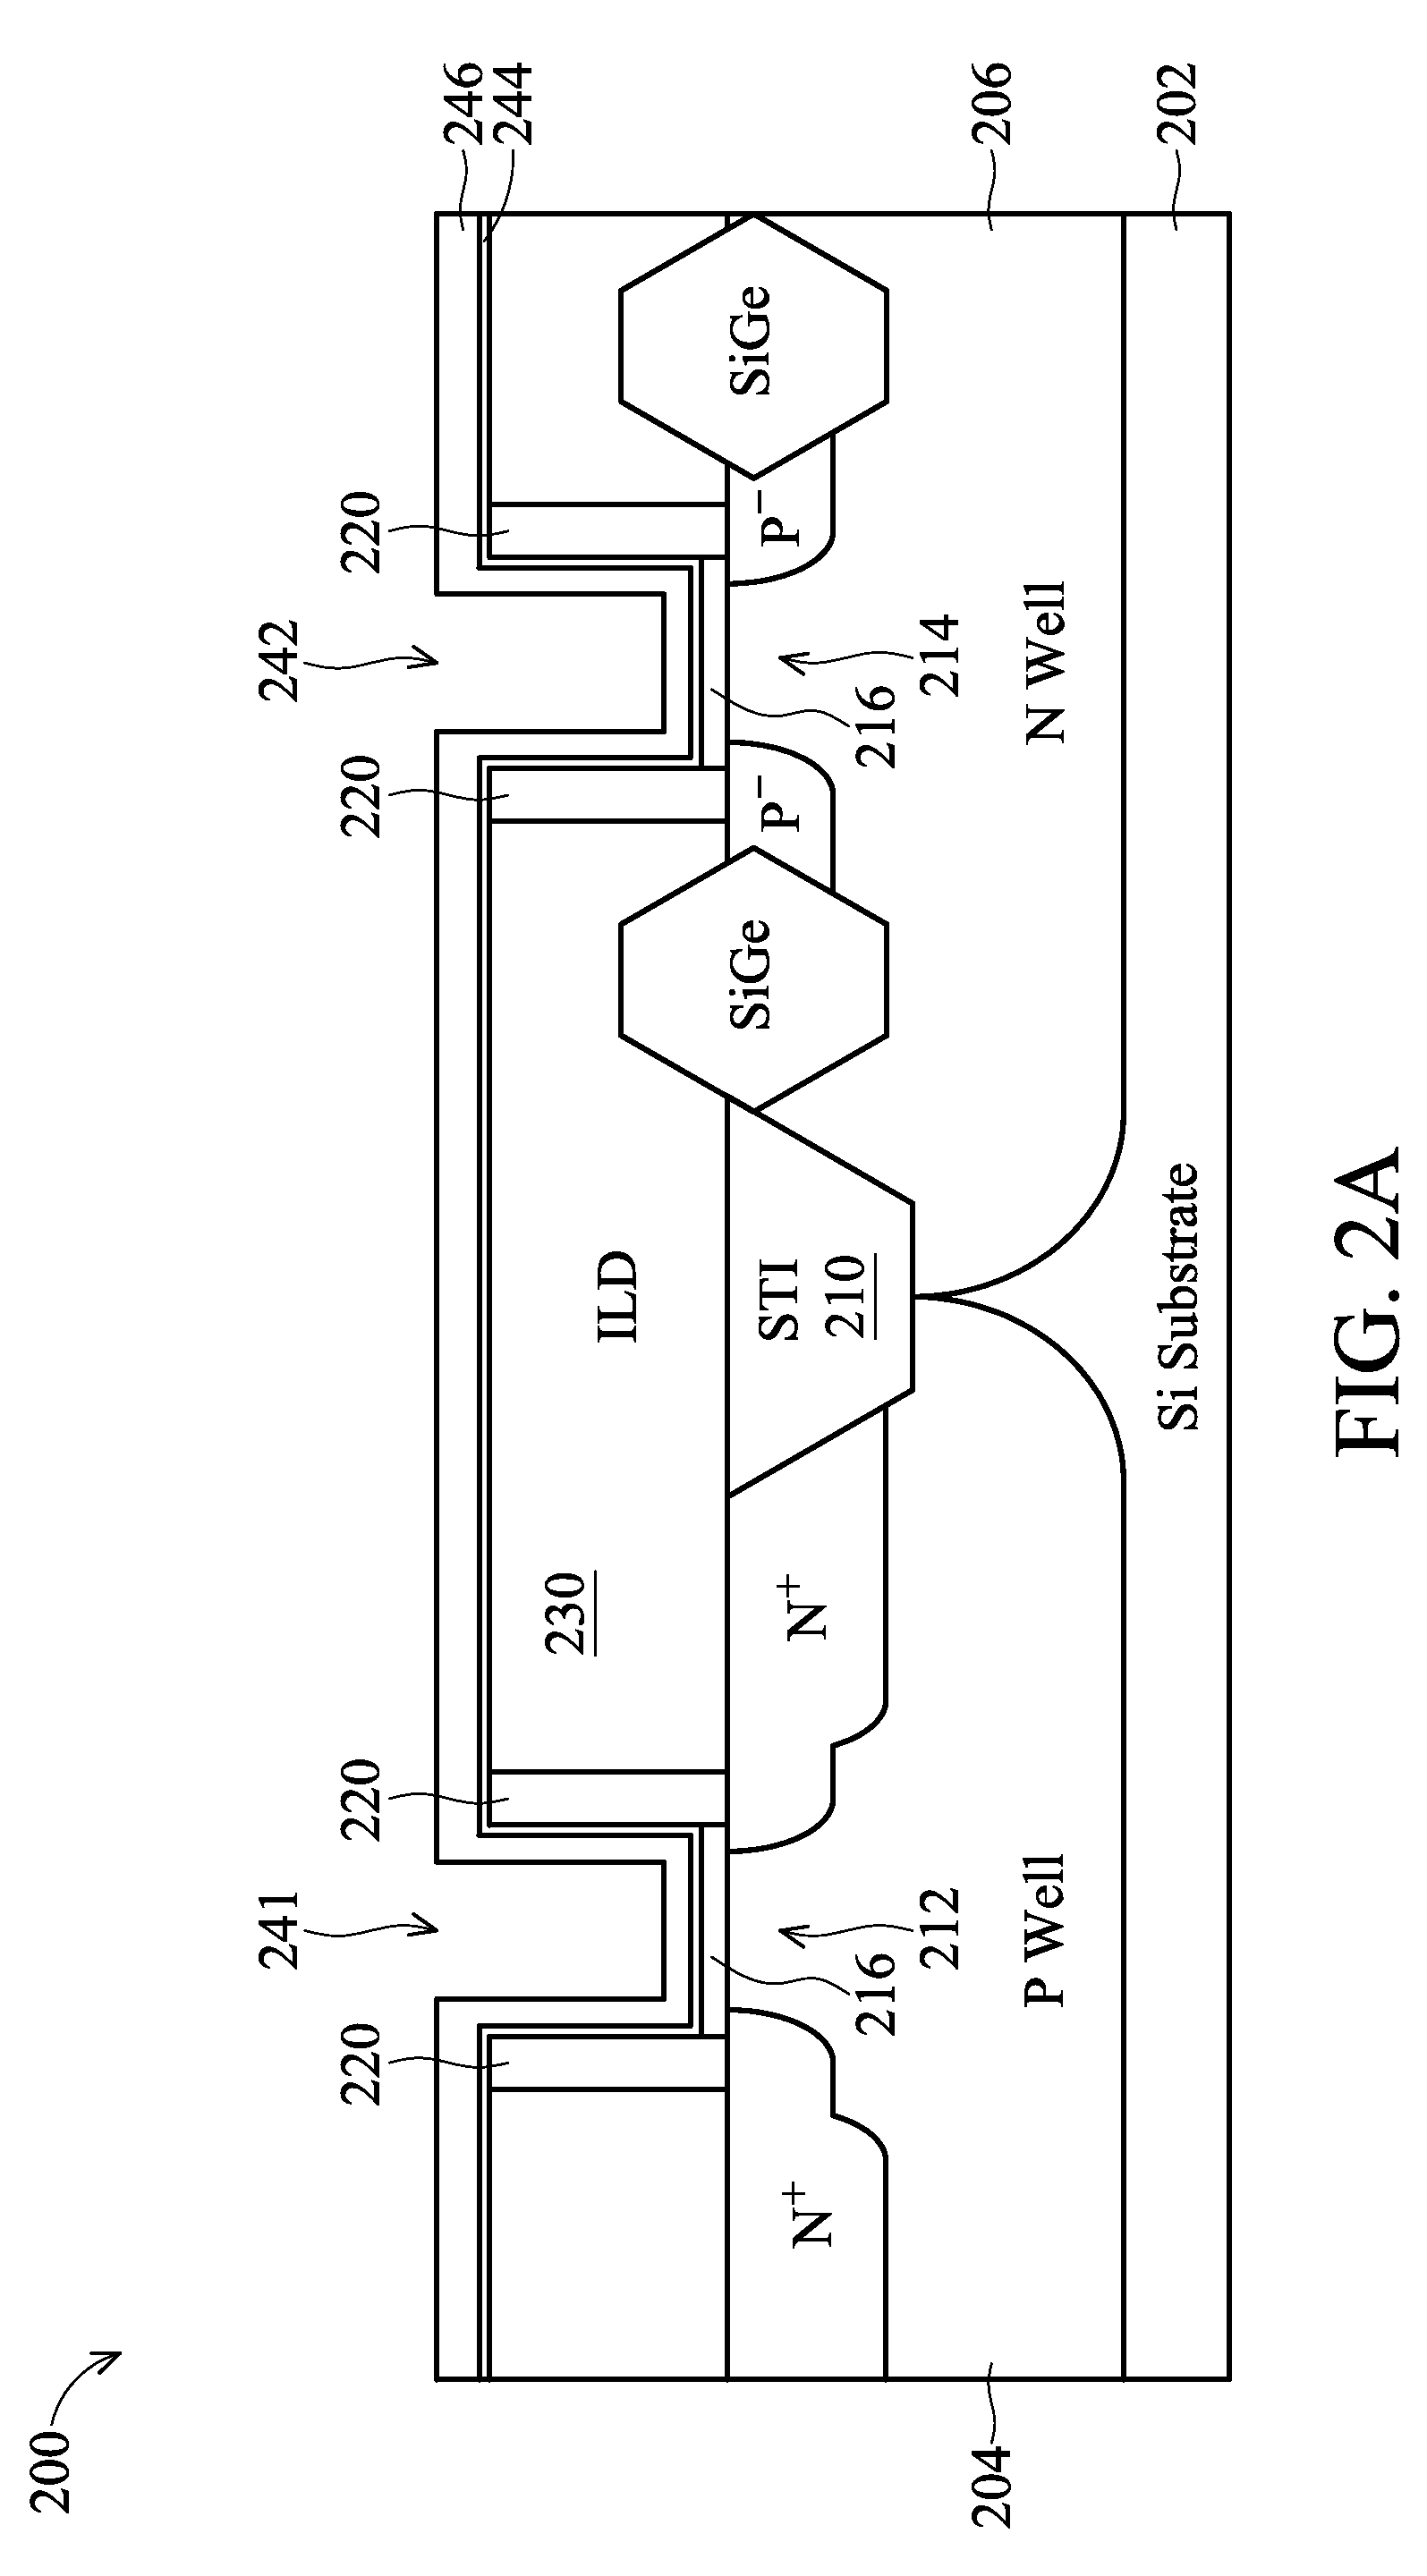 Method for forming metal gates in a gate last process